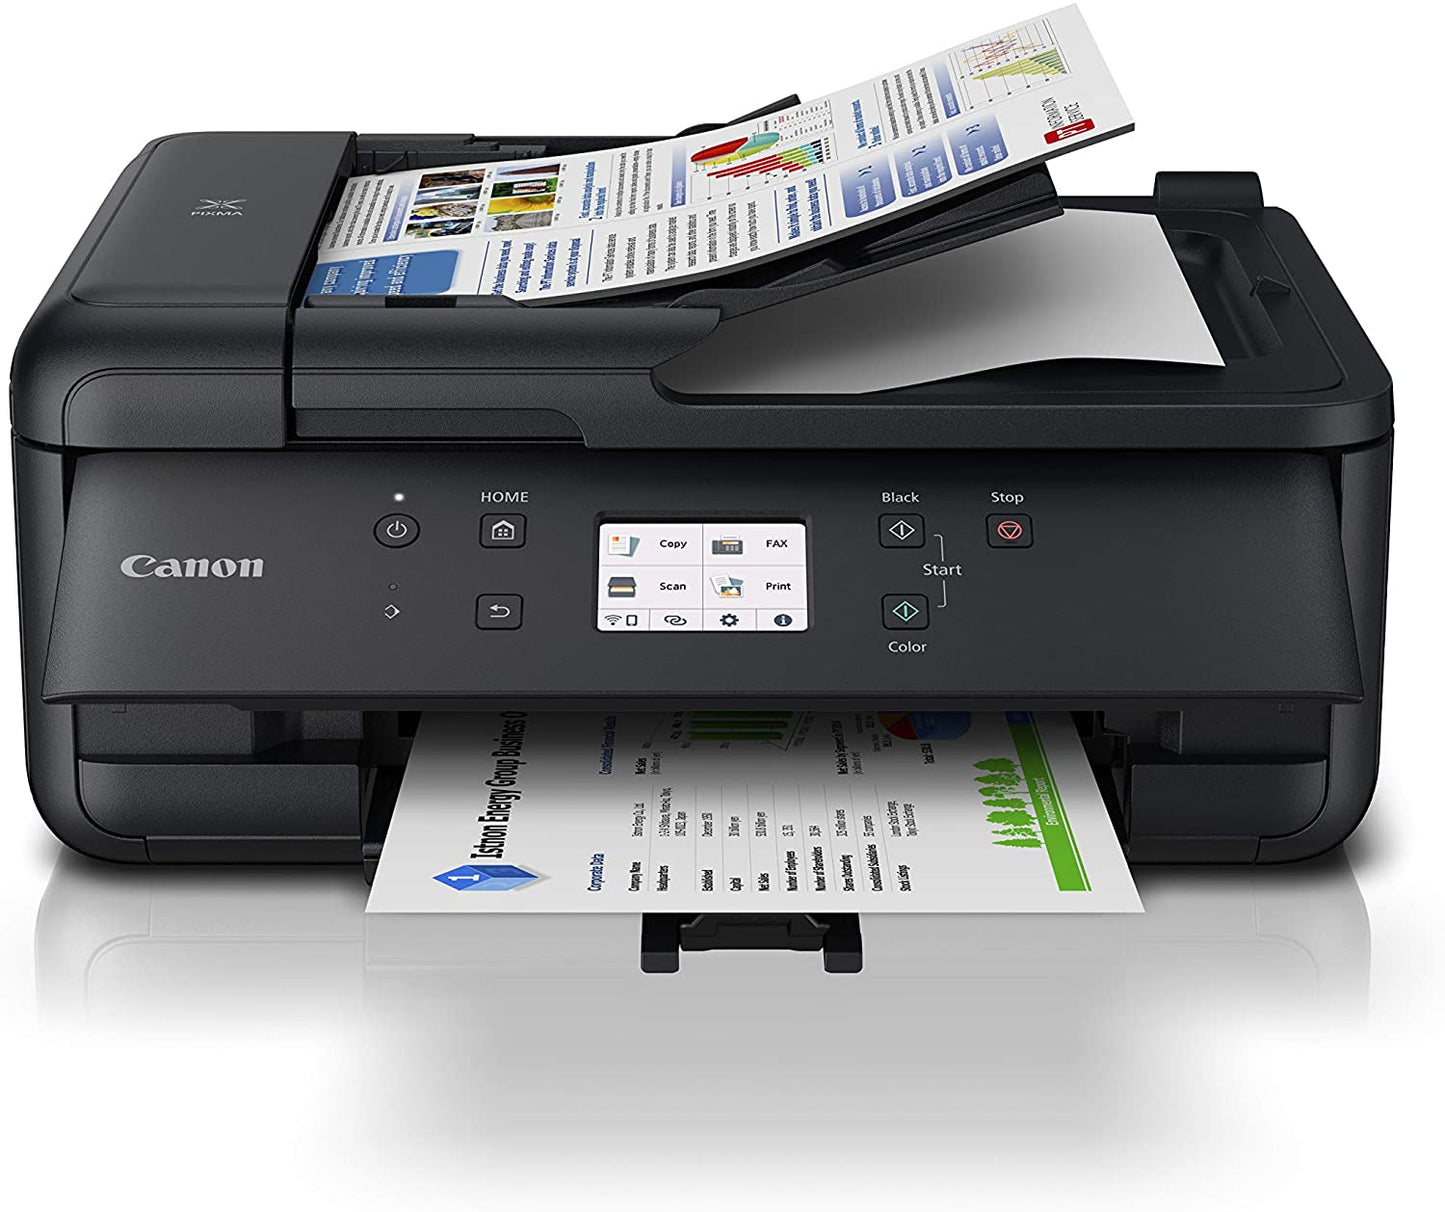 Canon Pixma TR7620 Wireless Home Ofﬁce All-in-One Inkjet Printer with ADF Black - Open Box